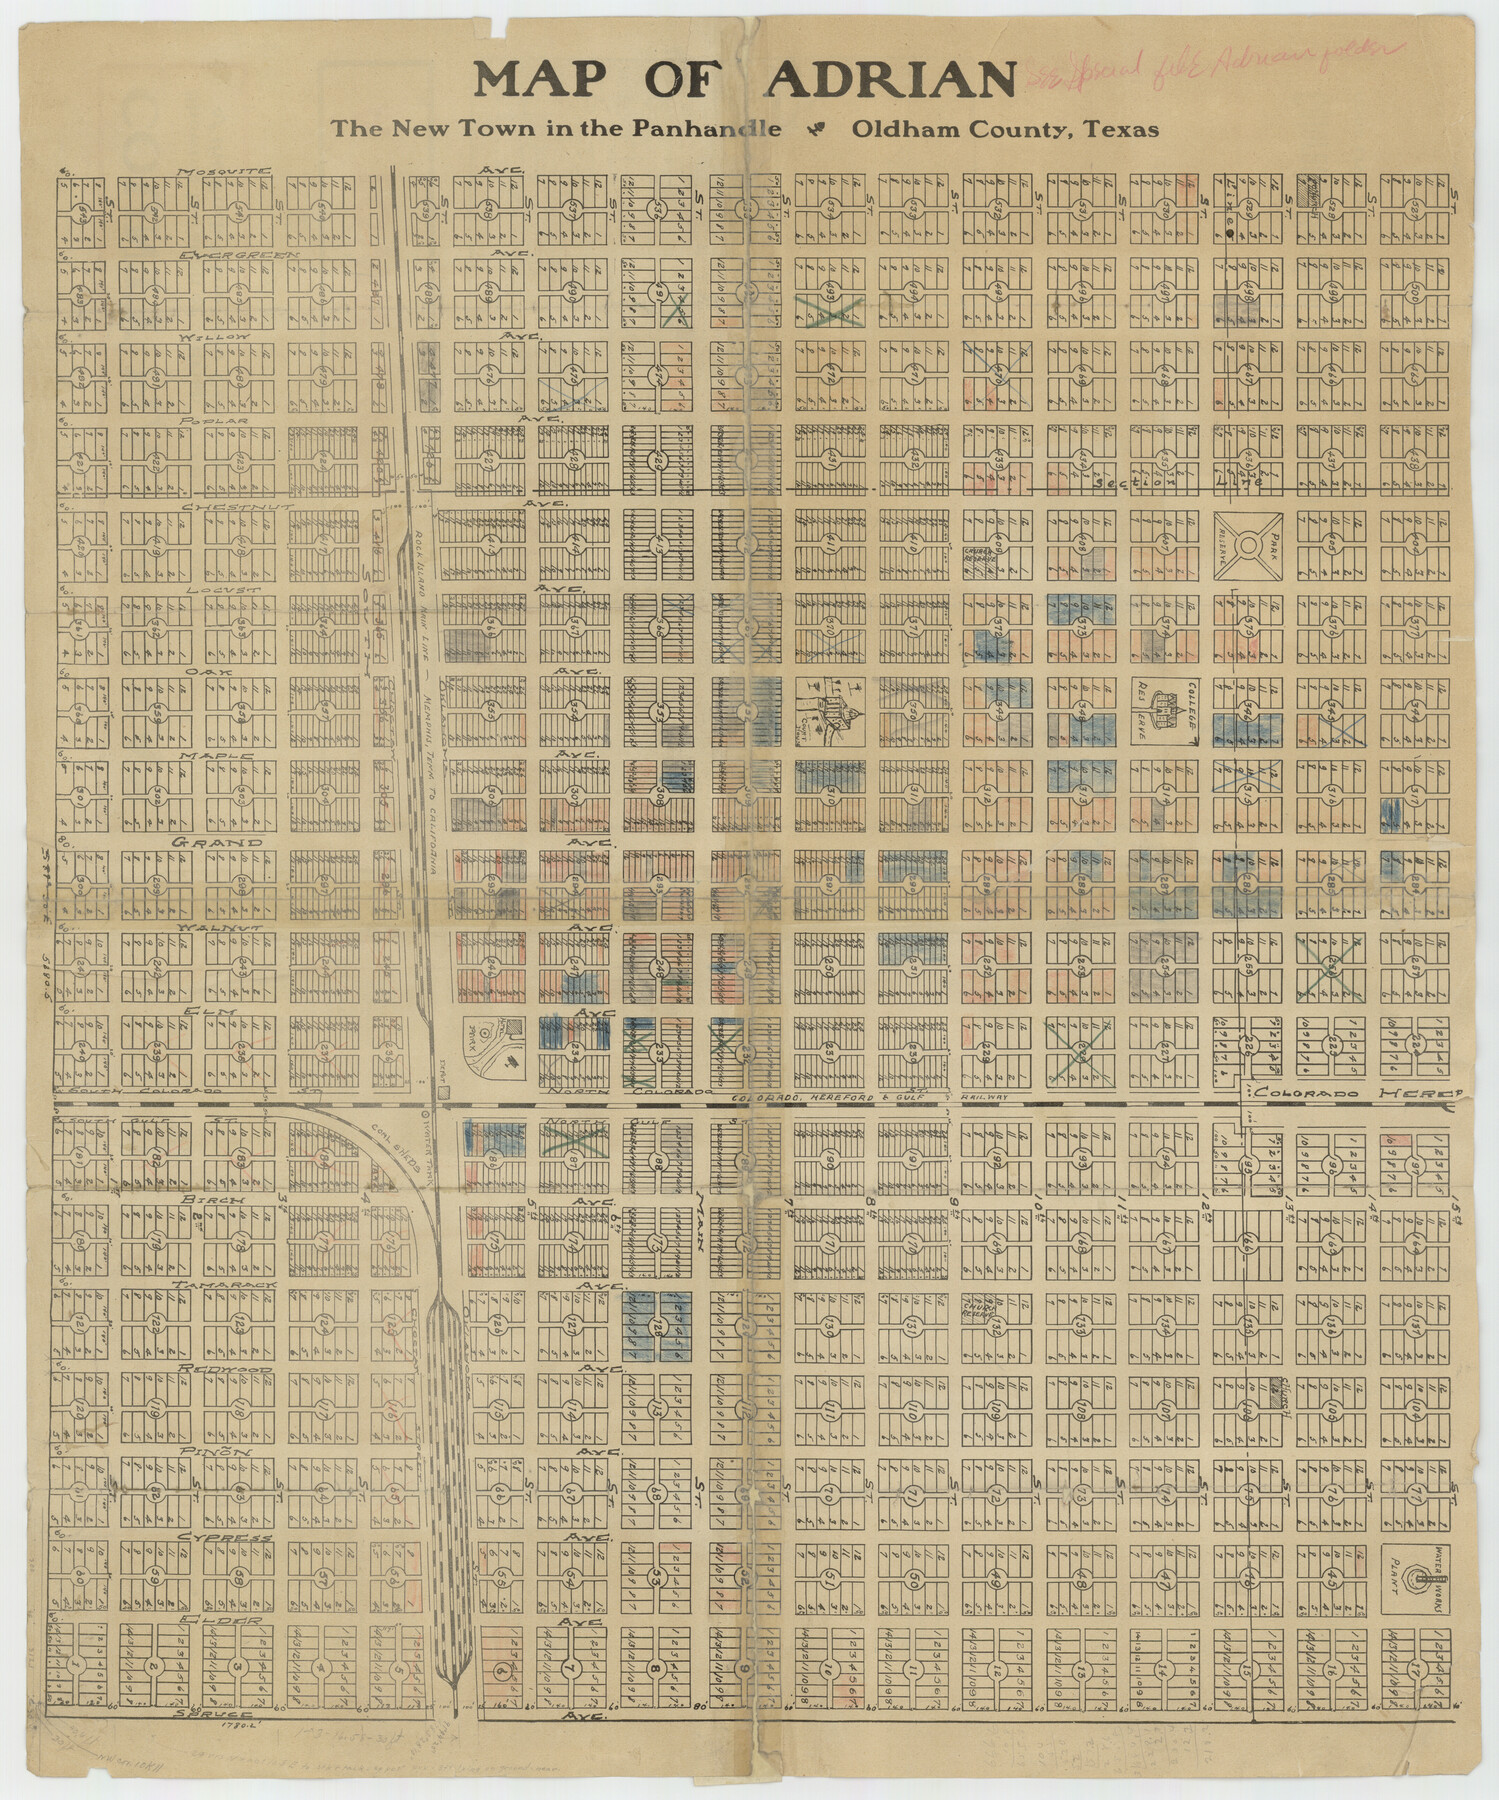 92135, Map of Adrian, the New Town in the Panhandle, Oldham County, Texas, Twichell Survey Records